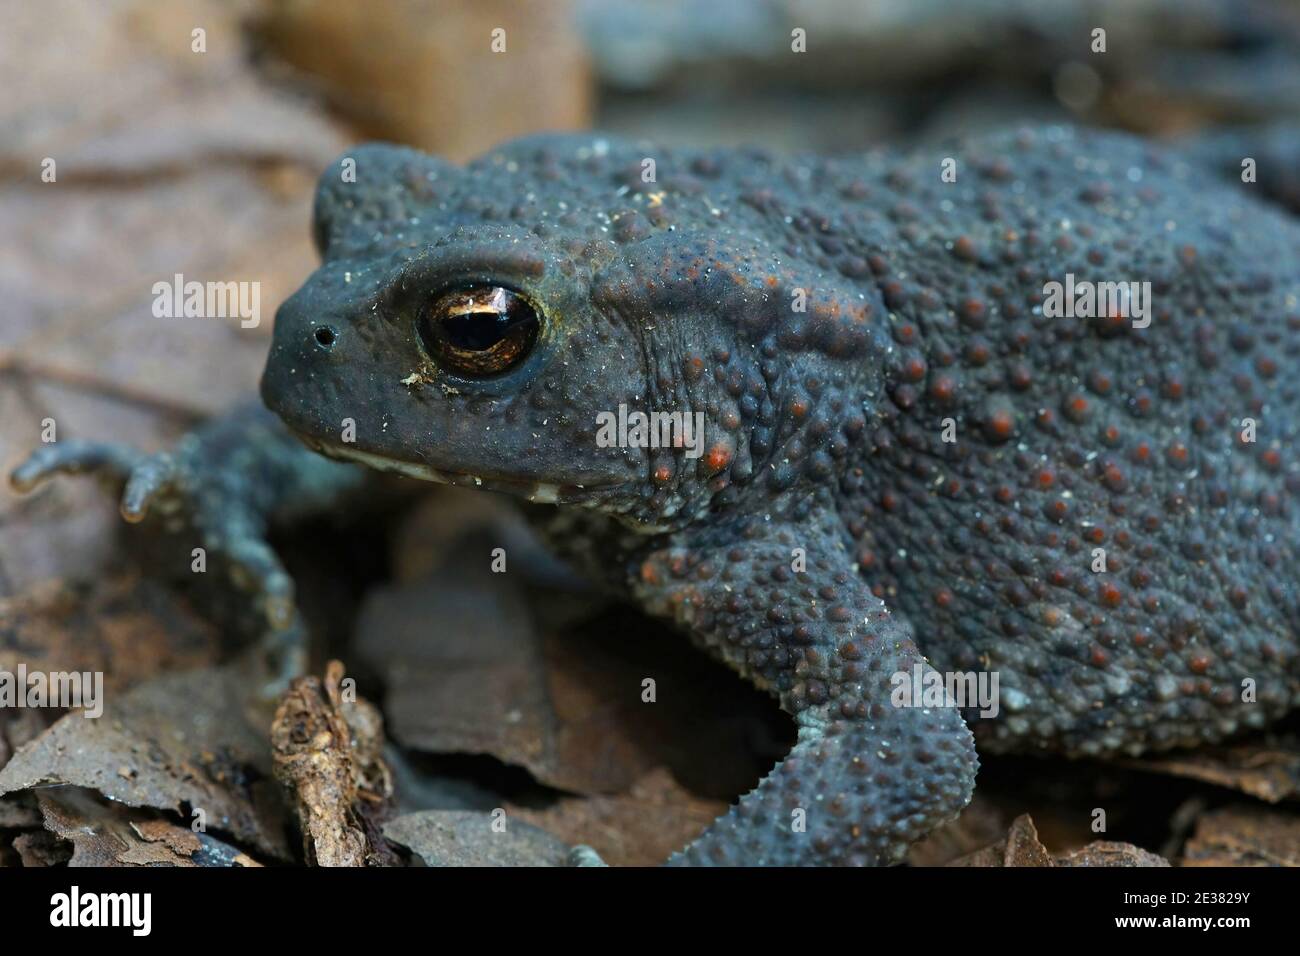 The common toad, Bufo bufo on fallen leafs Stock Photo